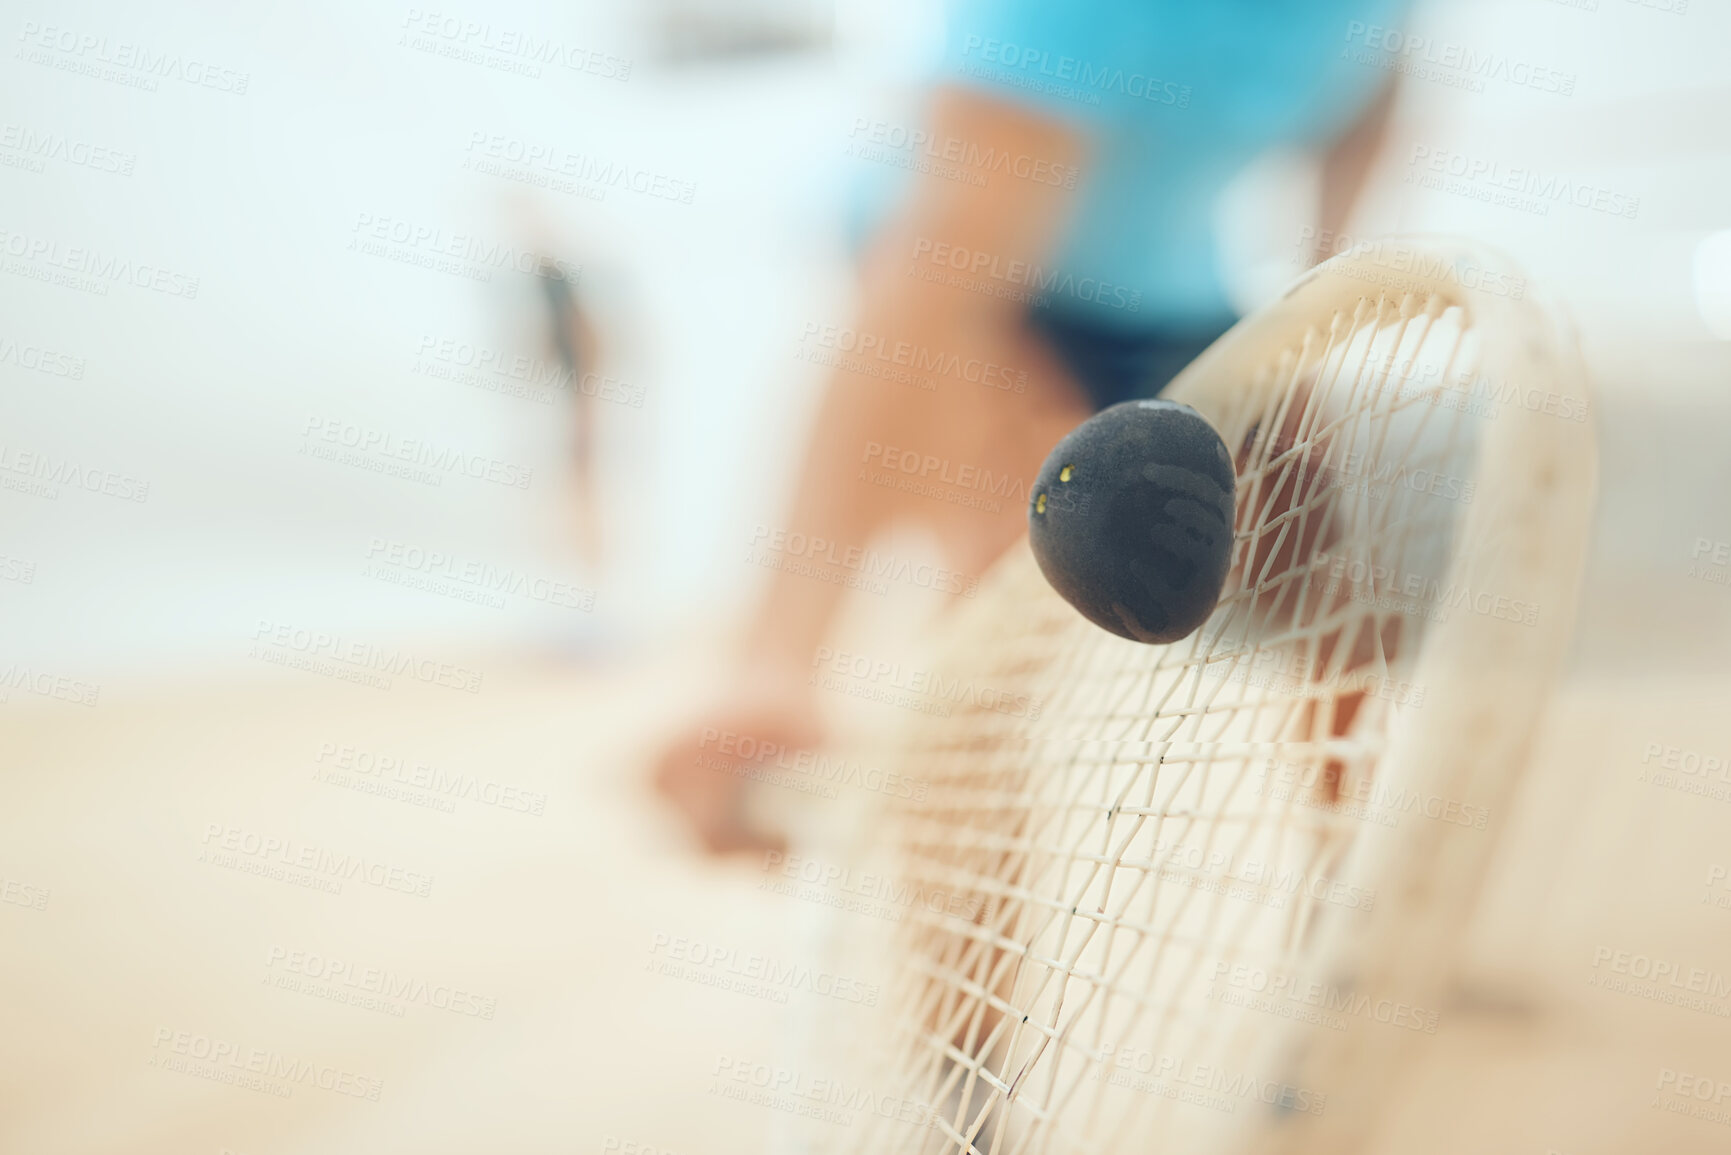 Buy stock photo Closeup of unknown athletic squash player using a racket to hit a ball during a court game. Fit active mixed race male athlete training and playing in a sports centre. Healthy cardio and motion blur